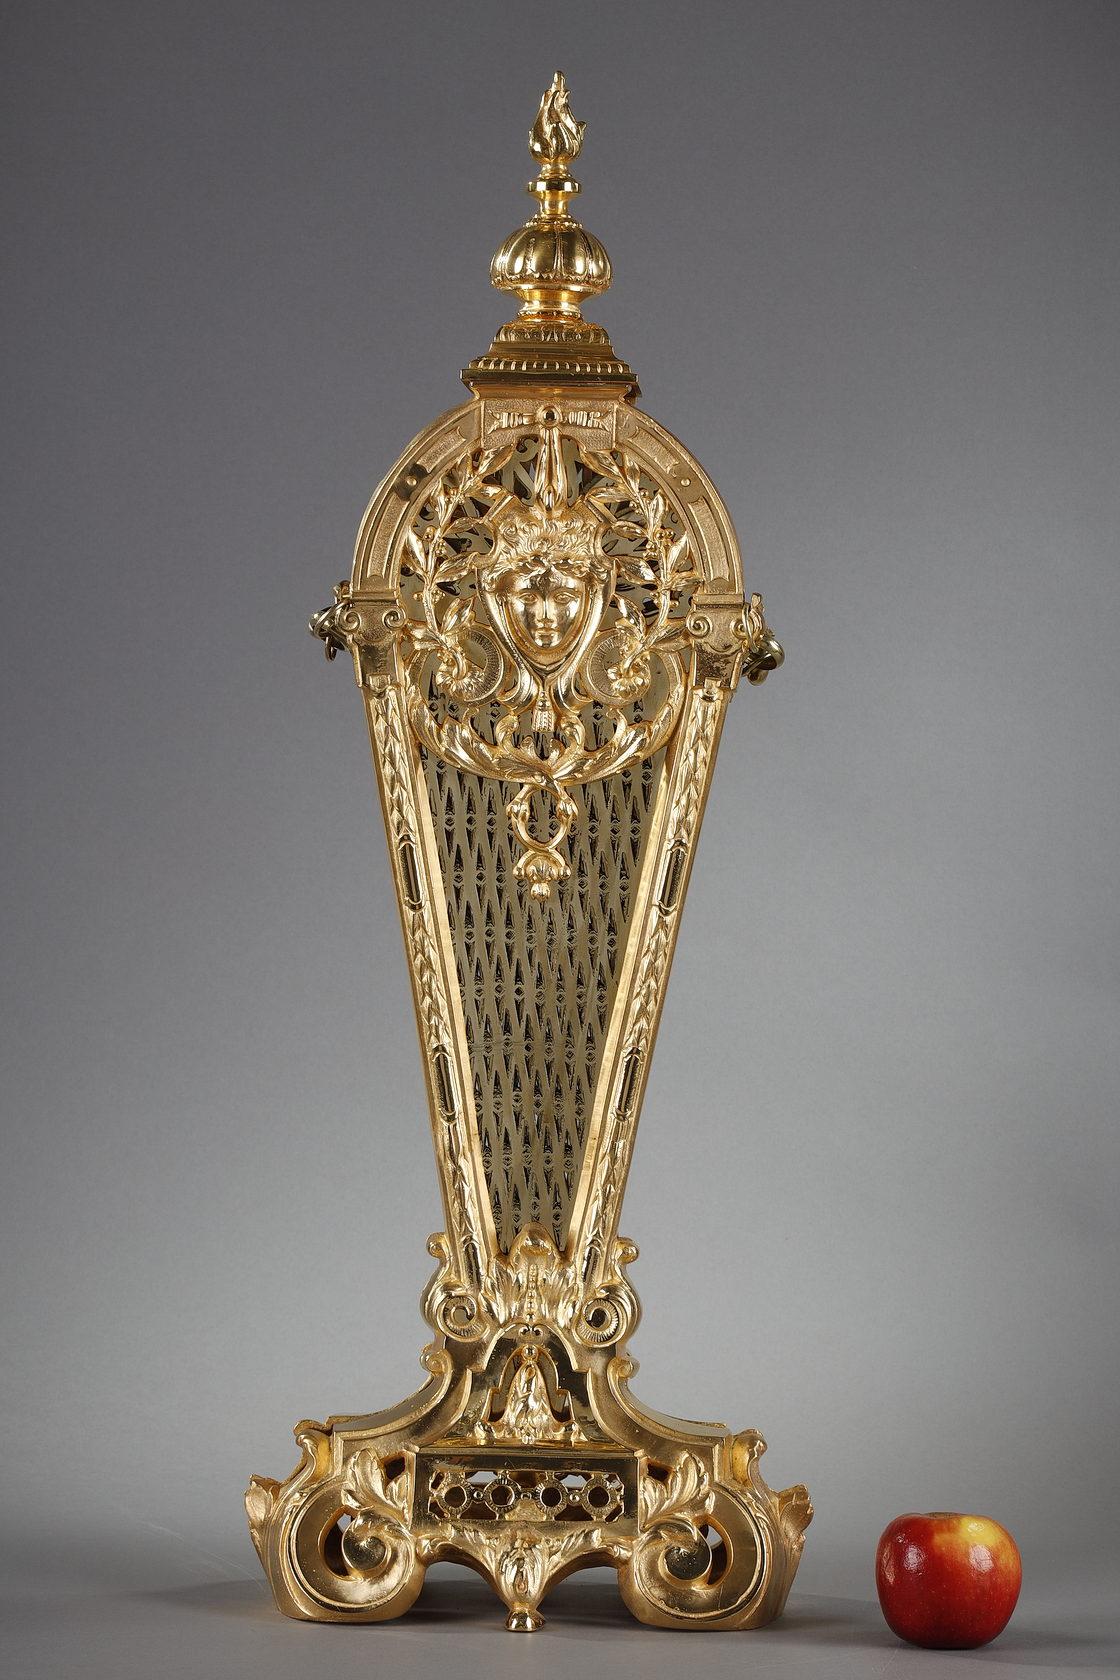 Fan-shaped mantel screen in brass and chased and gilded bronze. The central post is decorated with a female face surrounded by olive branches, trimmings and interlacing acanthus leaves. The fireguard is surmounted by a flame, a reference to the